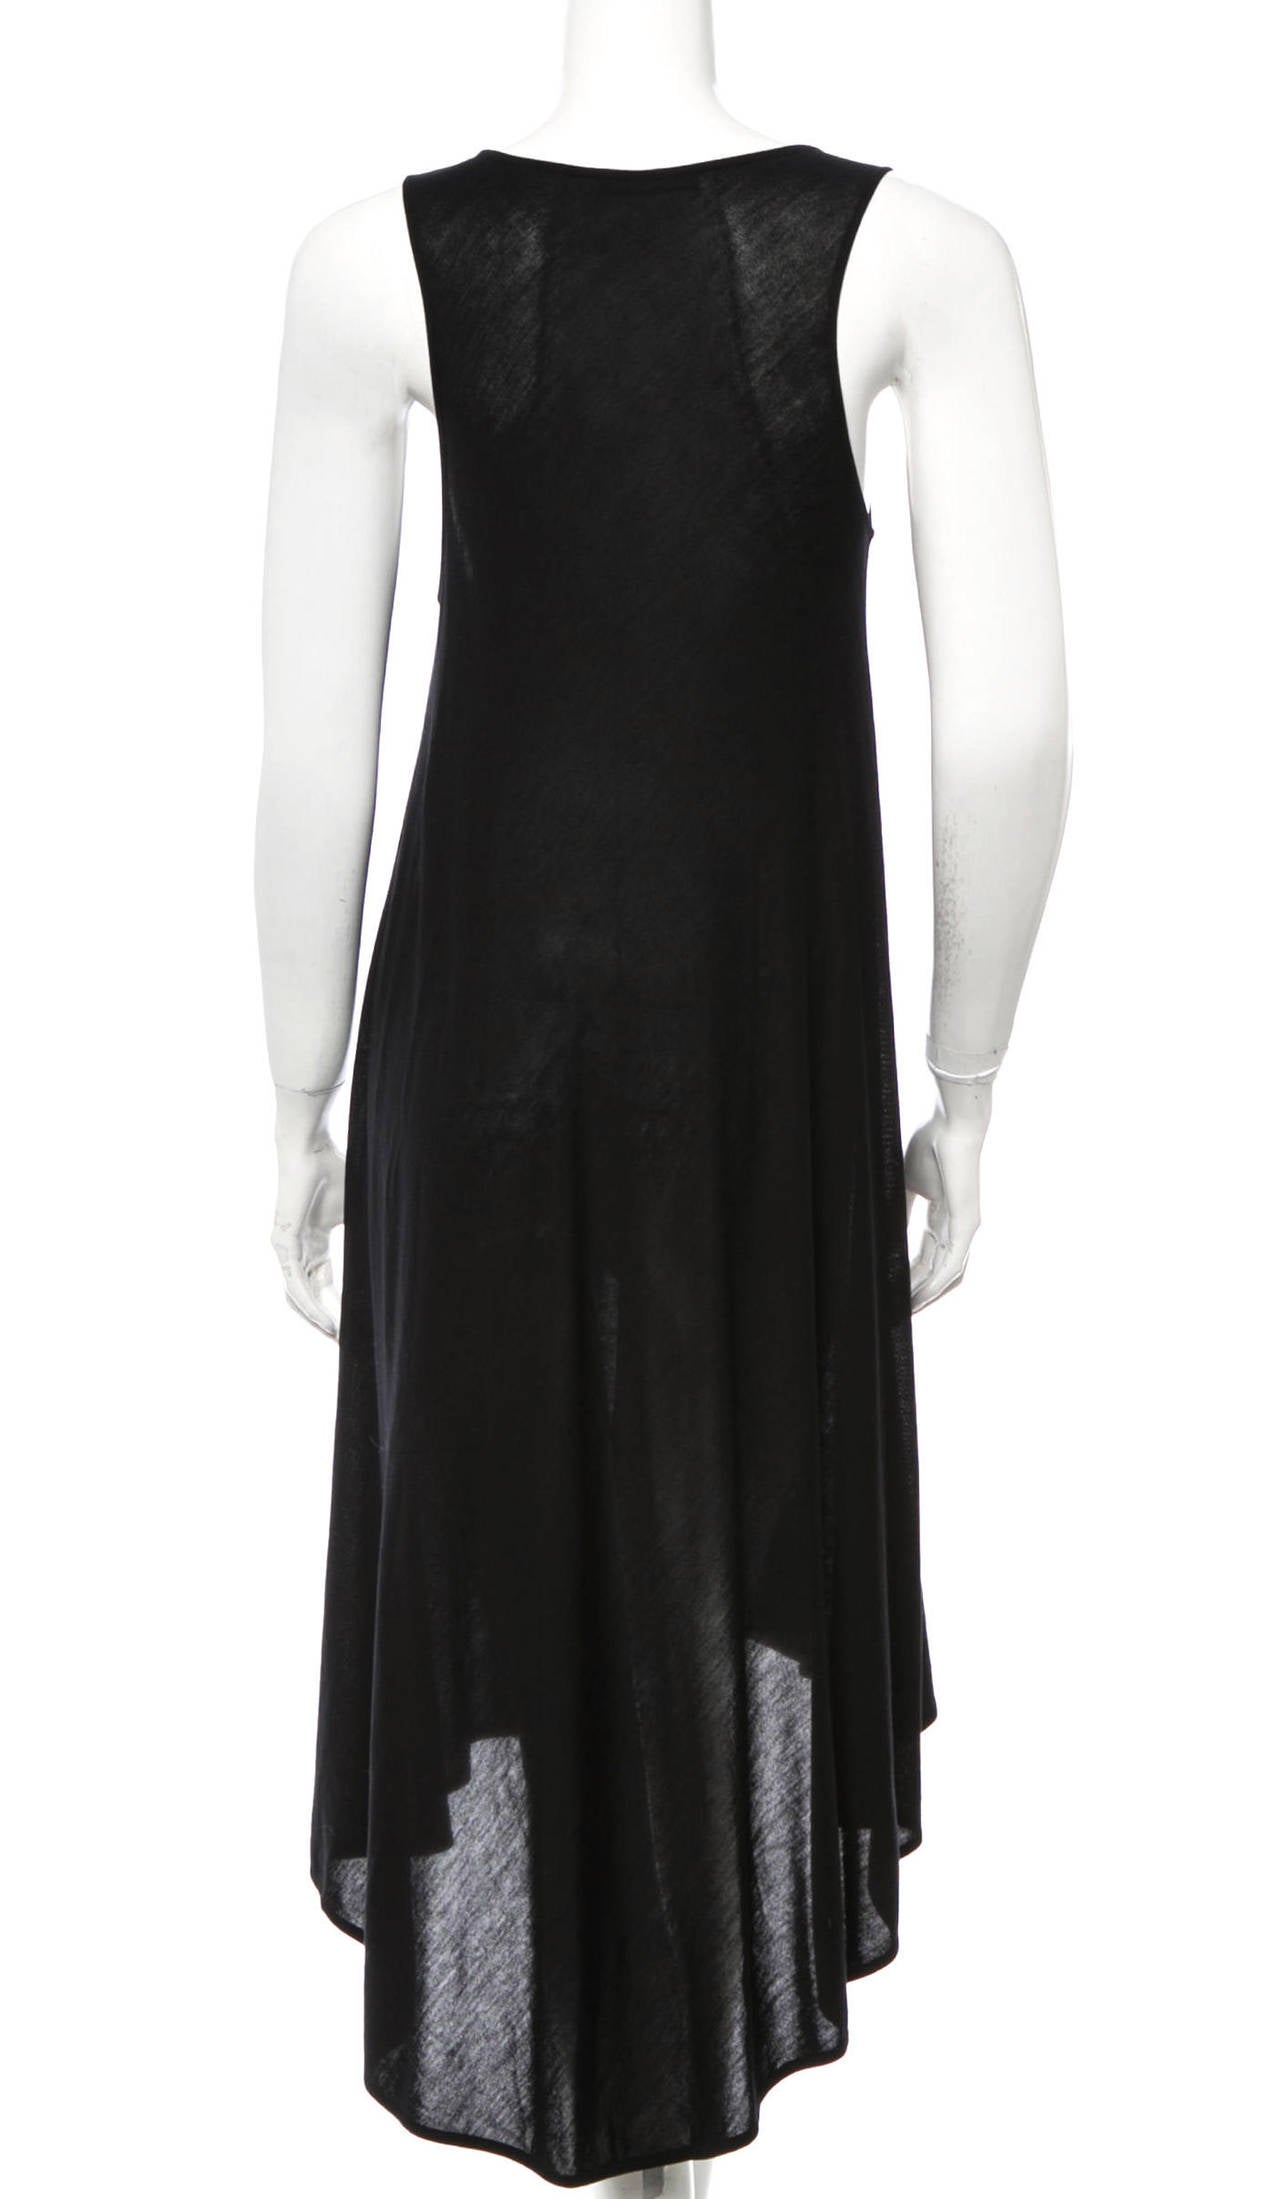 Alexander McQueen Folkloric Embroidered Black Dress SS 2011 For Sale 1